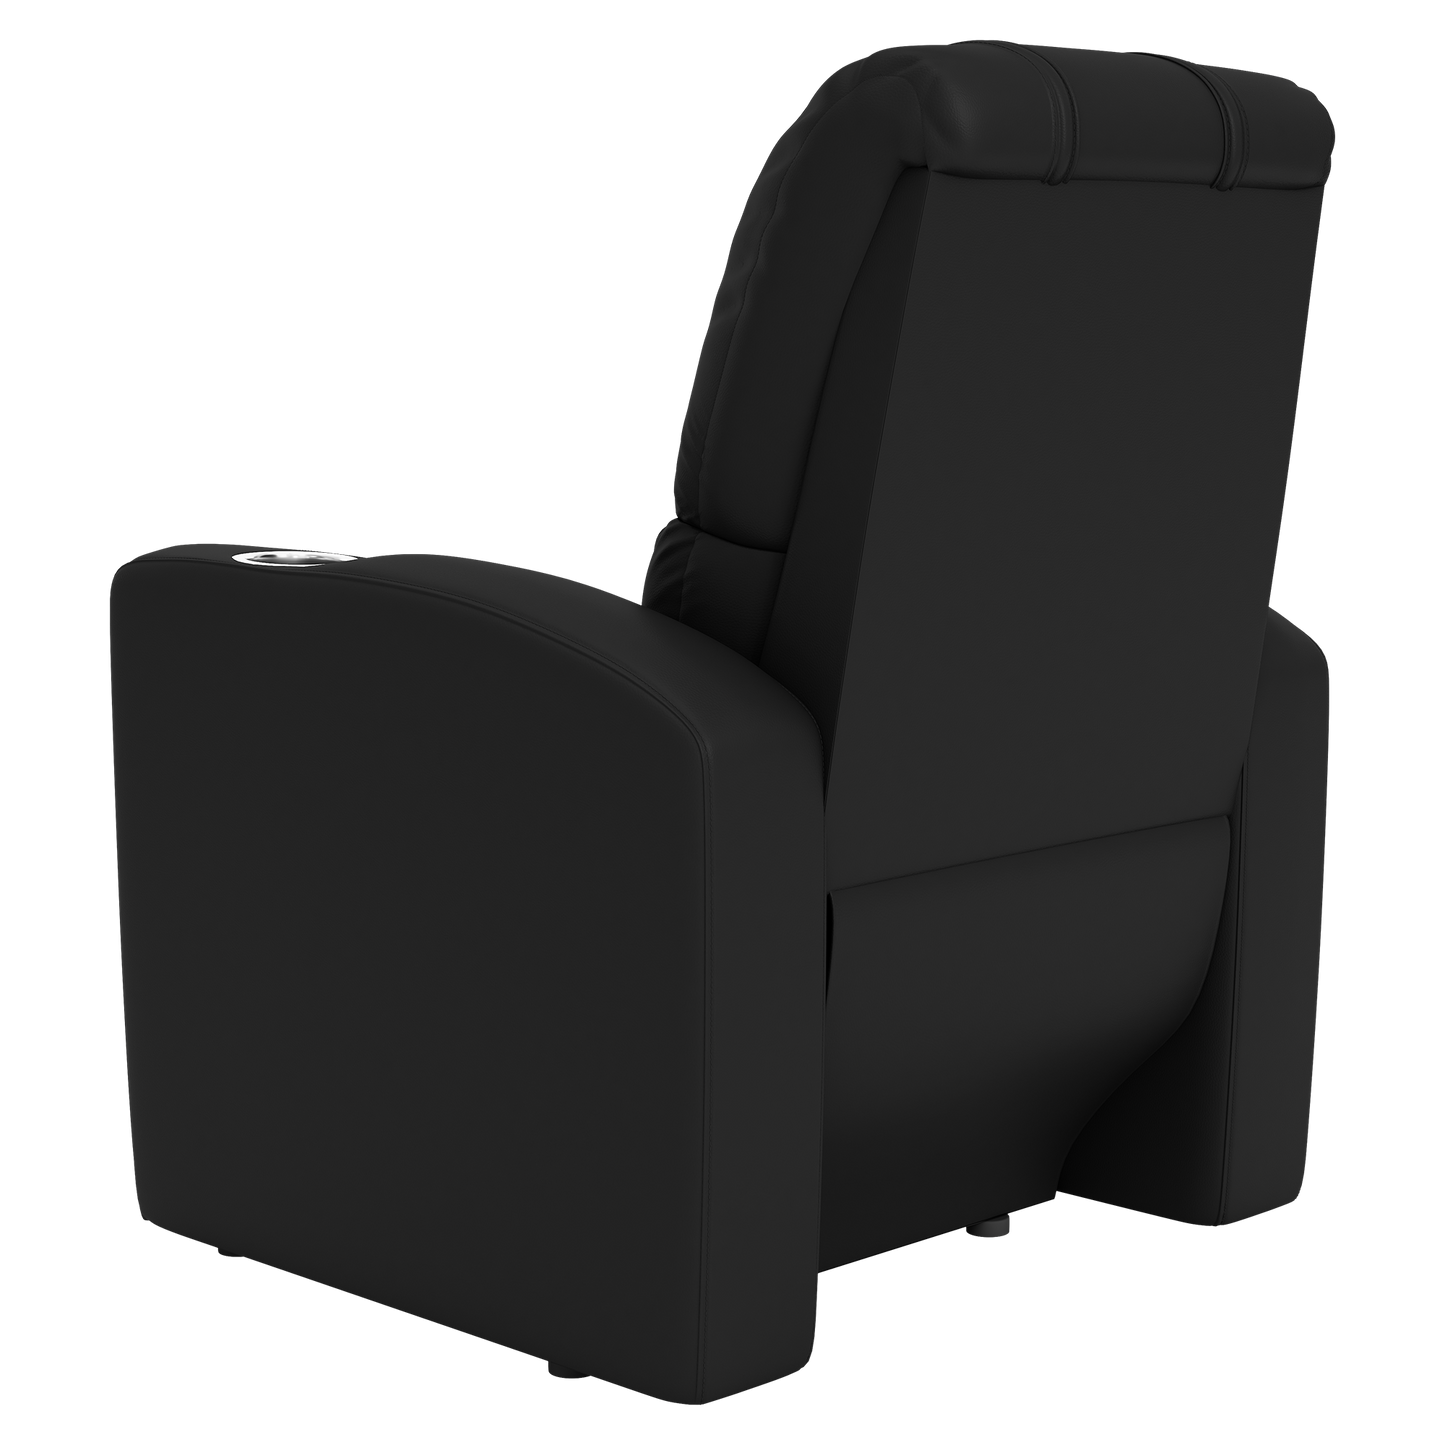 Stealth Recliner with Georgia Bulldogs Logo